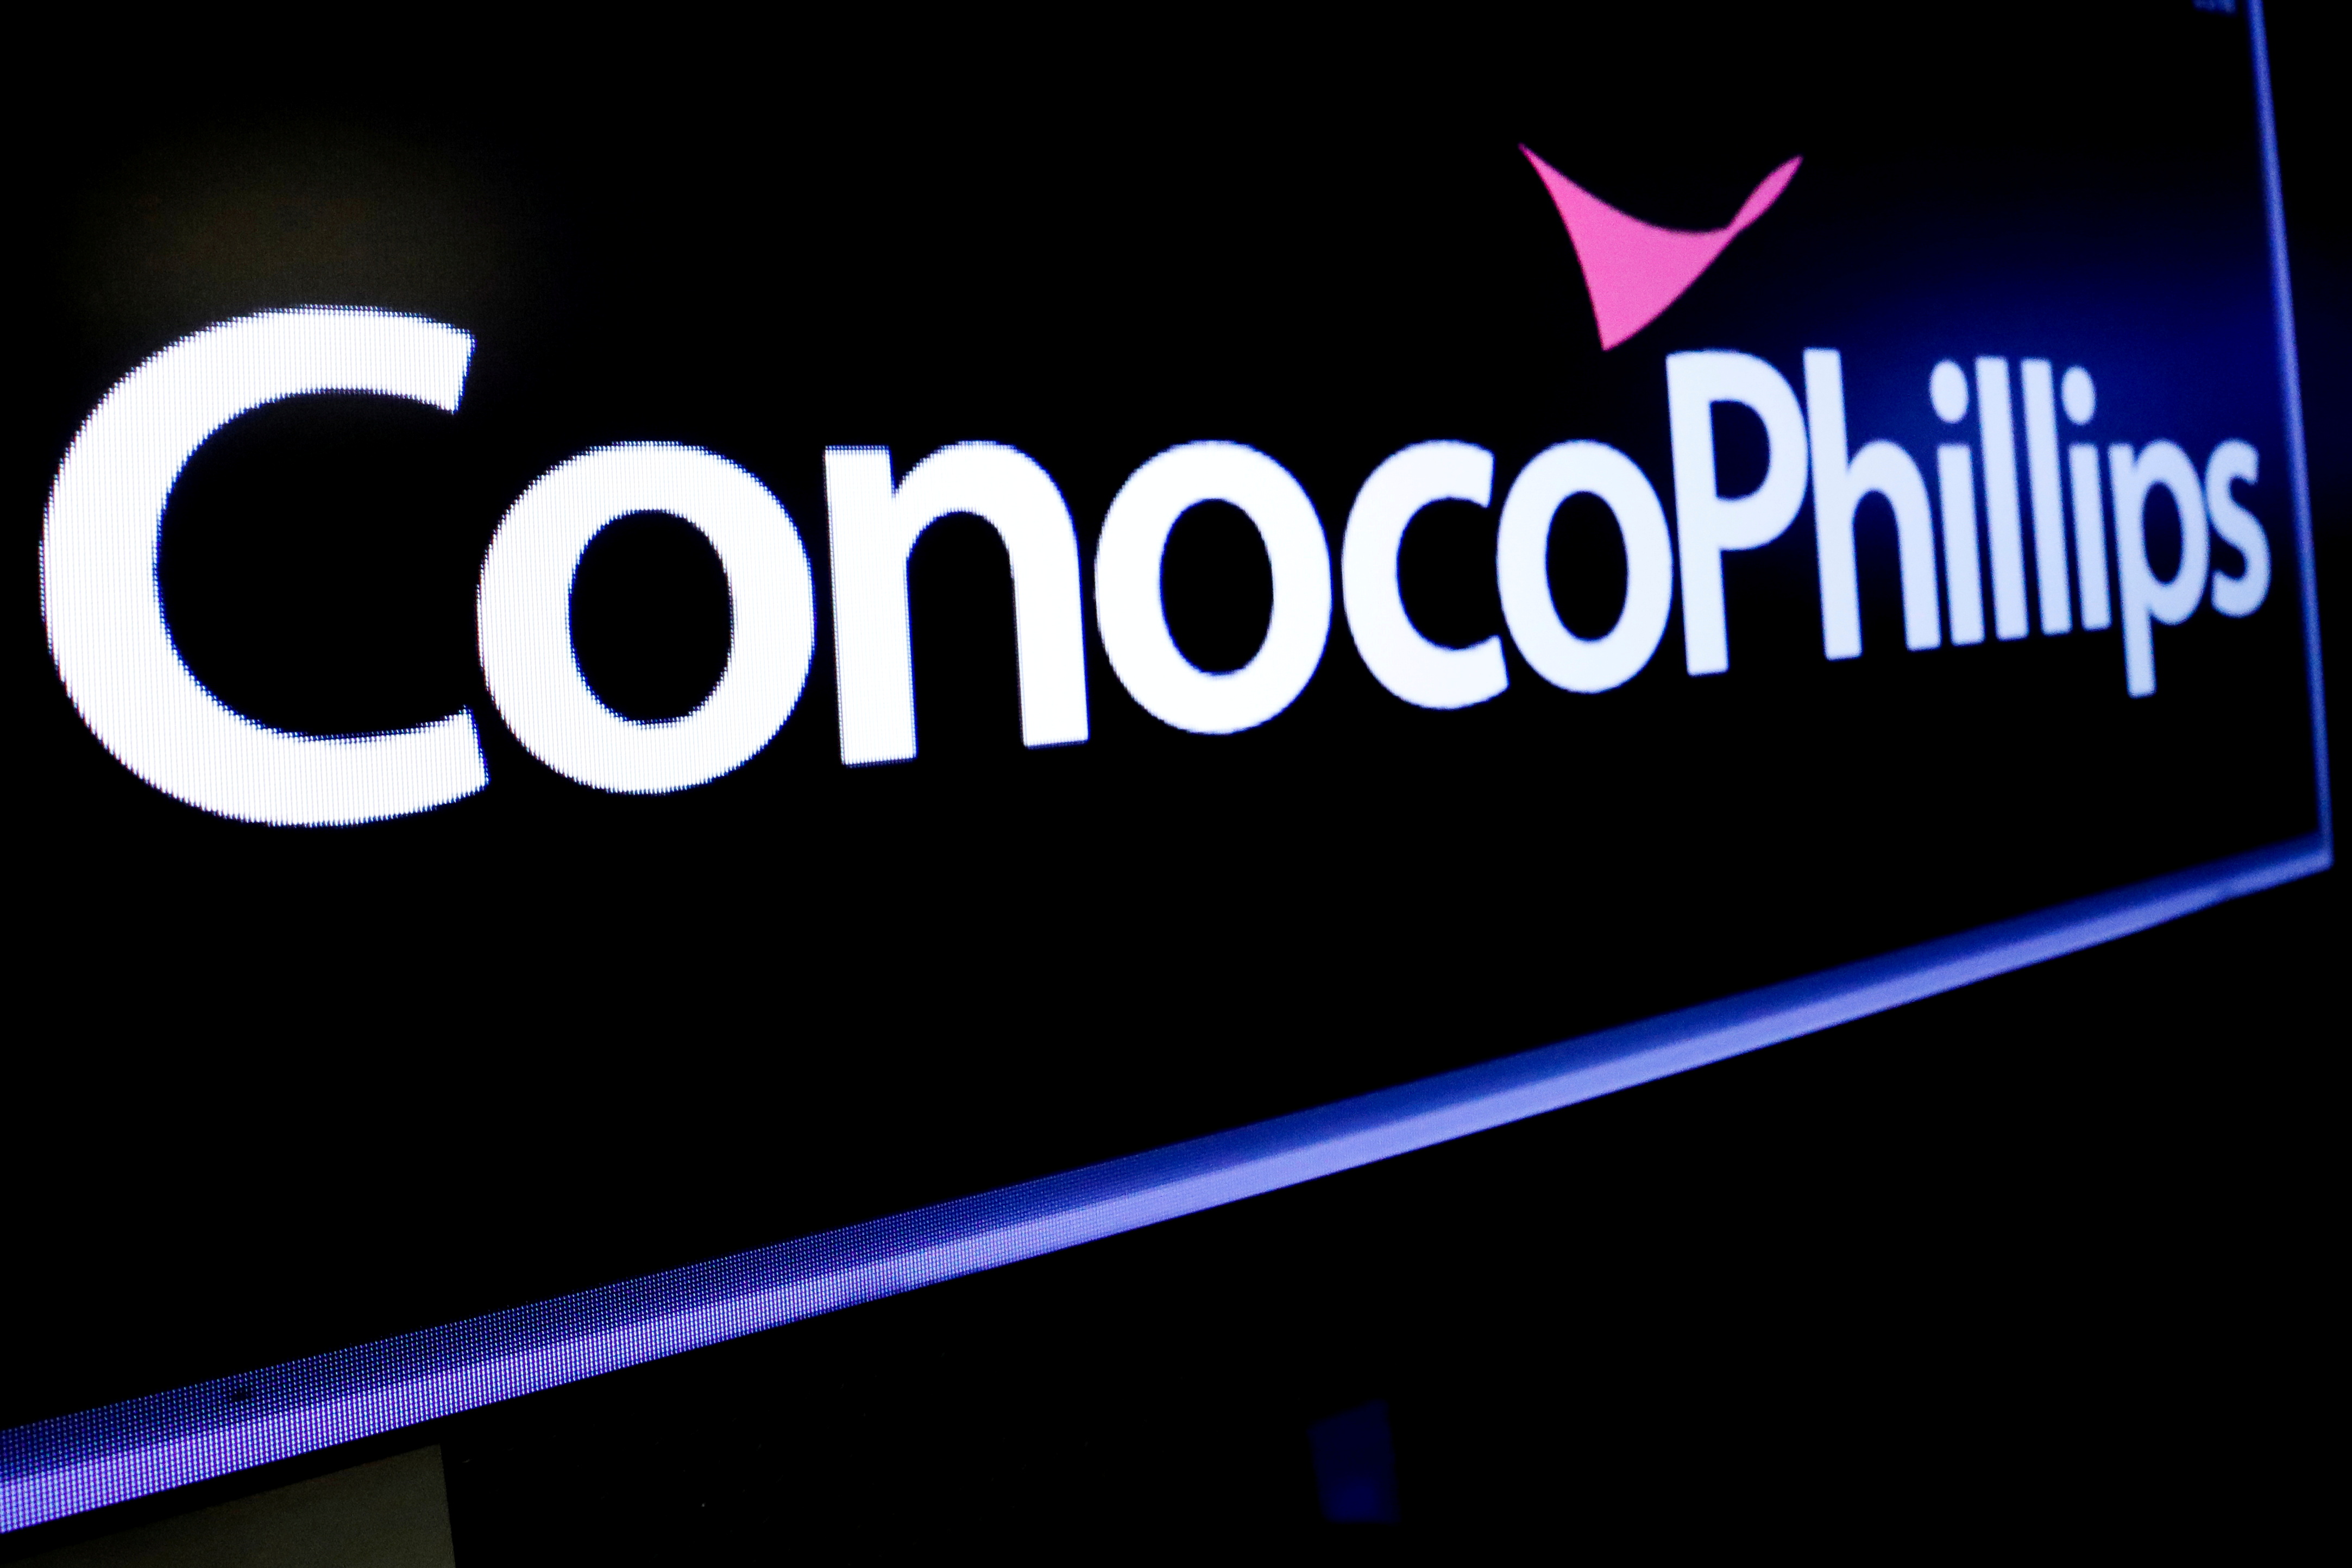 The logo for ConocoPhillips is displayed on a screen on the floor at the New York Stock Exchange (NYSE) in New York, U.S., January 13, 2020. REUTERS/Brendan McDermid/File Photo